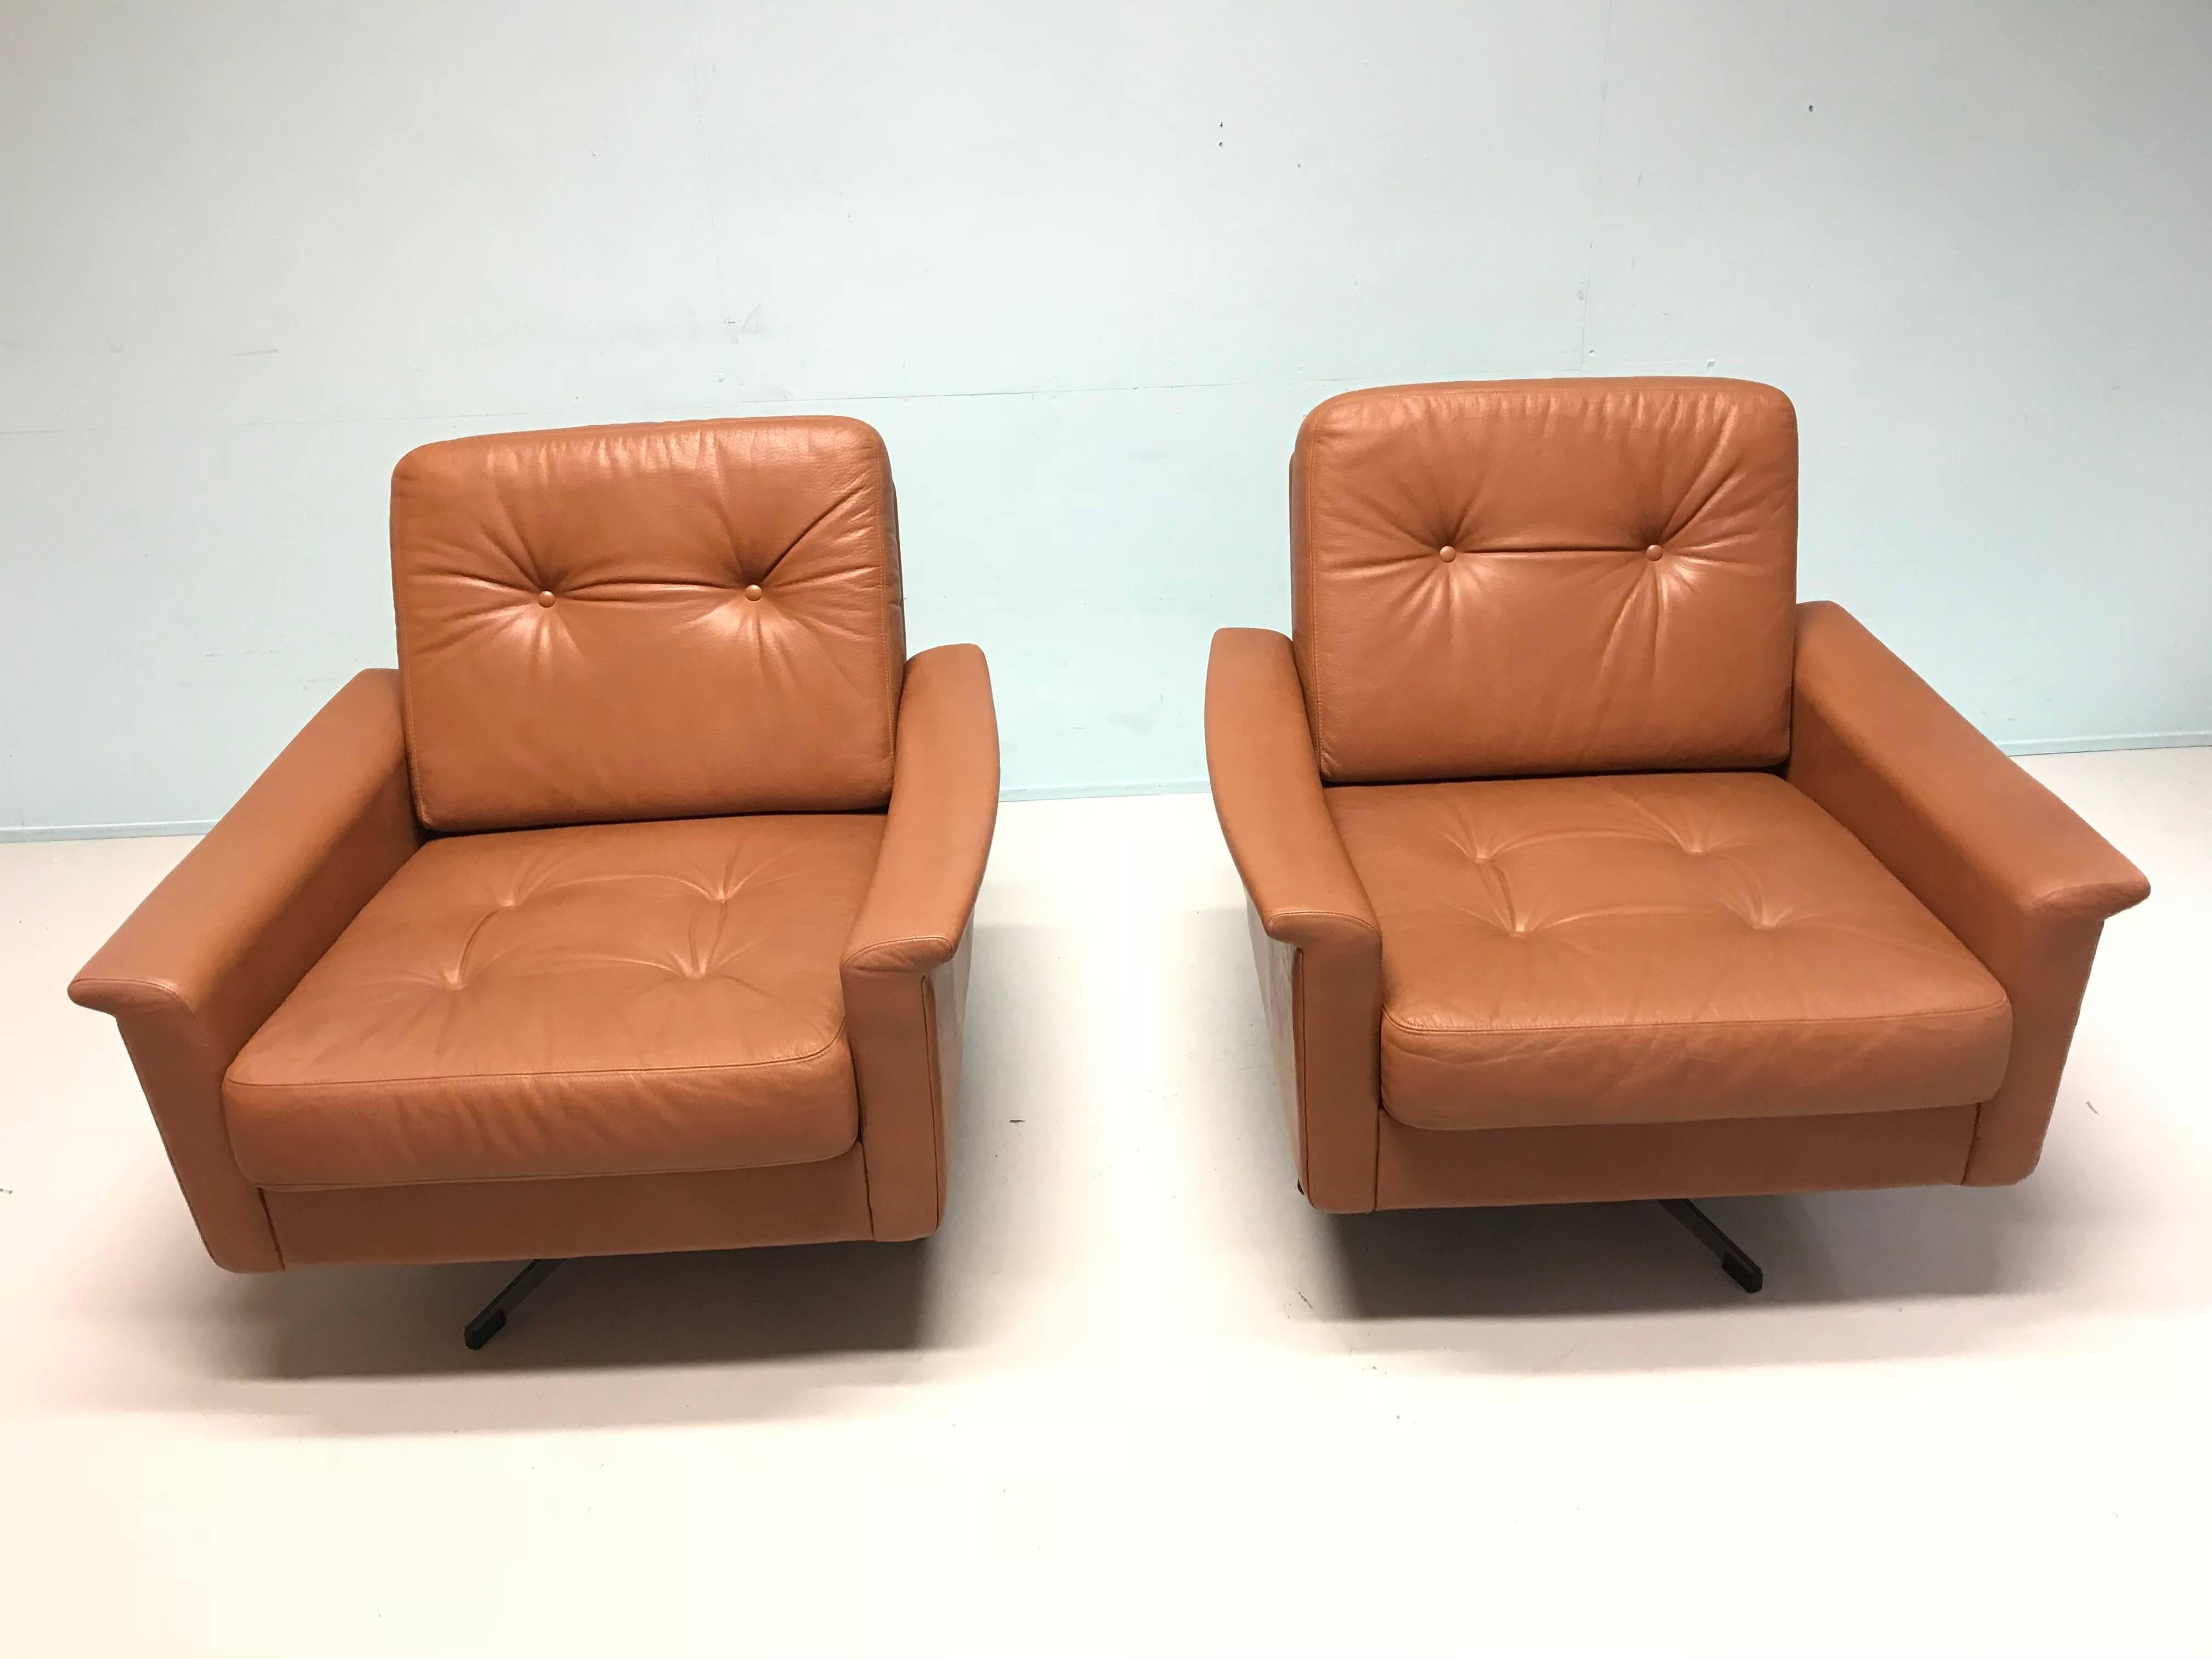 Pair of stunning leather armchairs from the 1960s.
Condition: very good.
Measurements:
81 cm W, 73 cm D, 75 cm H, 42 cm seating height.
 